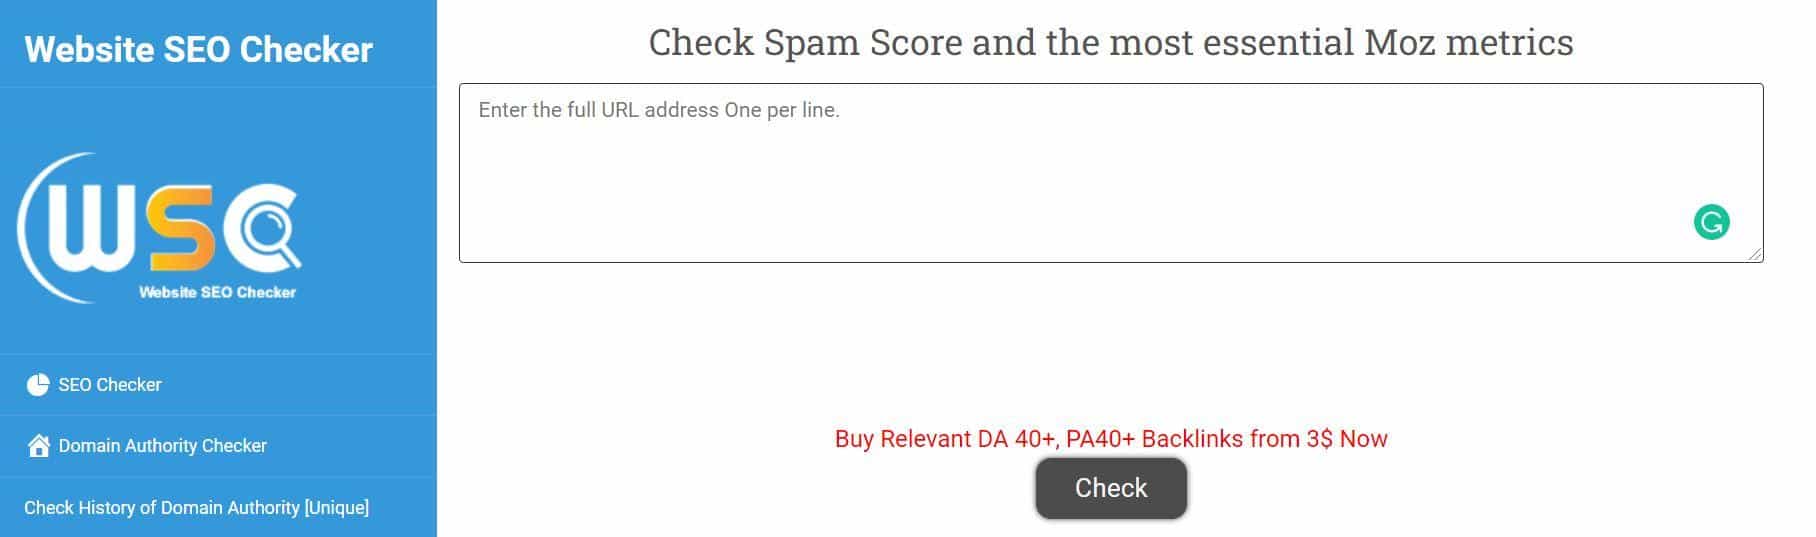 how to check spam score of a domain